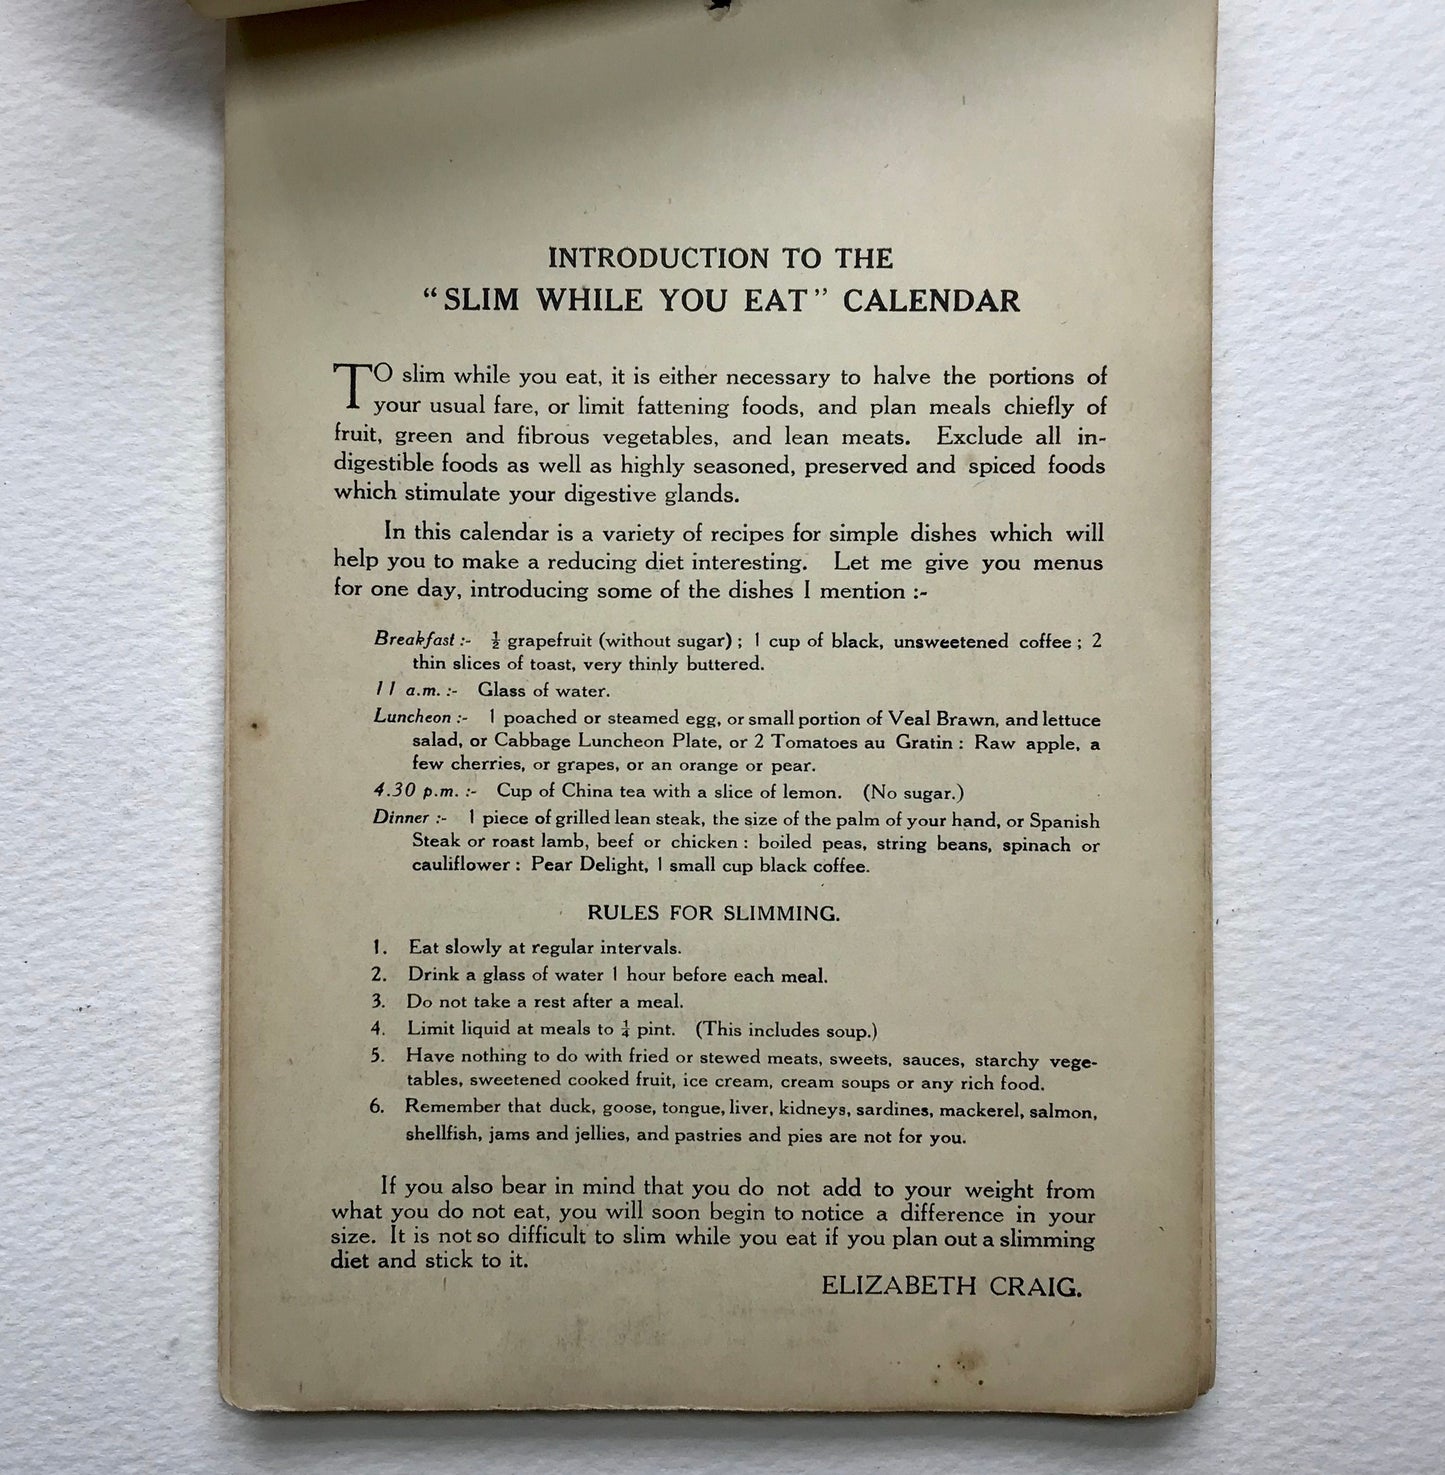 Slim While You Eat! A Calendar with over 100 Recipes. By Elizabeth Craig. Published by G. Delgado Ltd in 1940. 21 x 14 cms. A rare book.